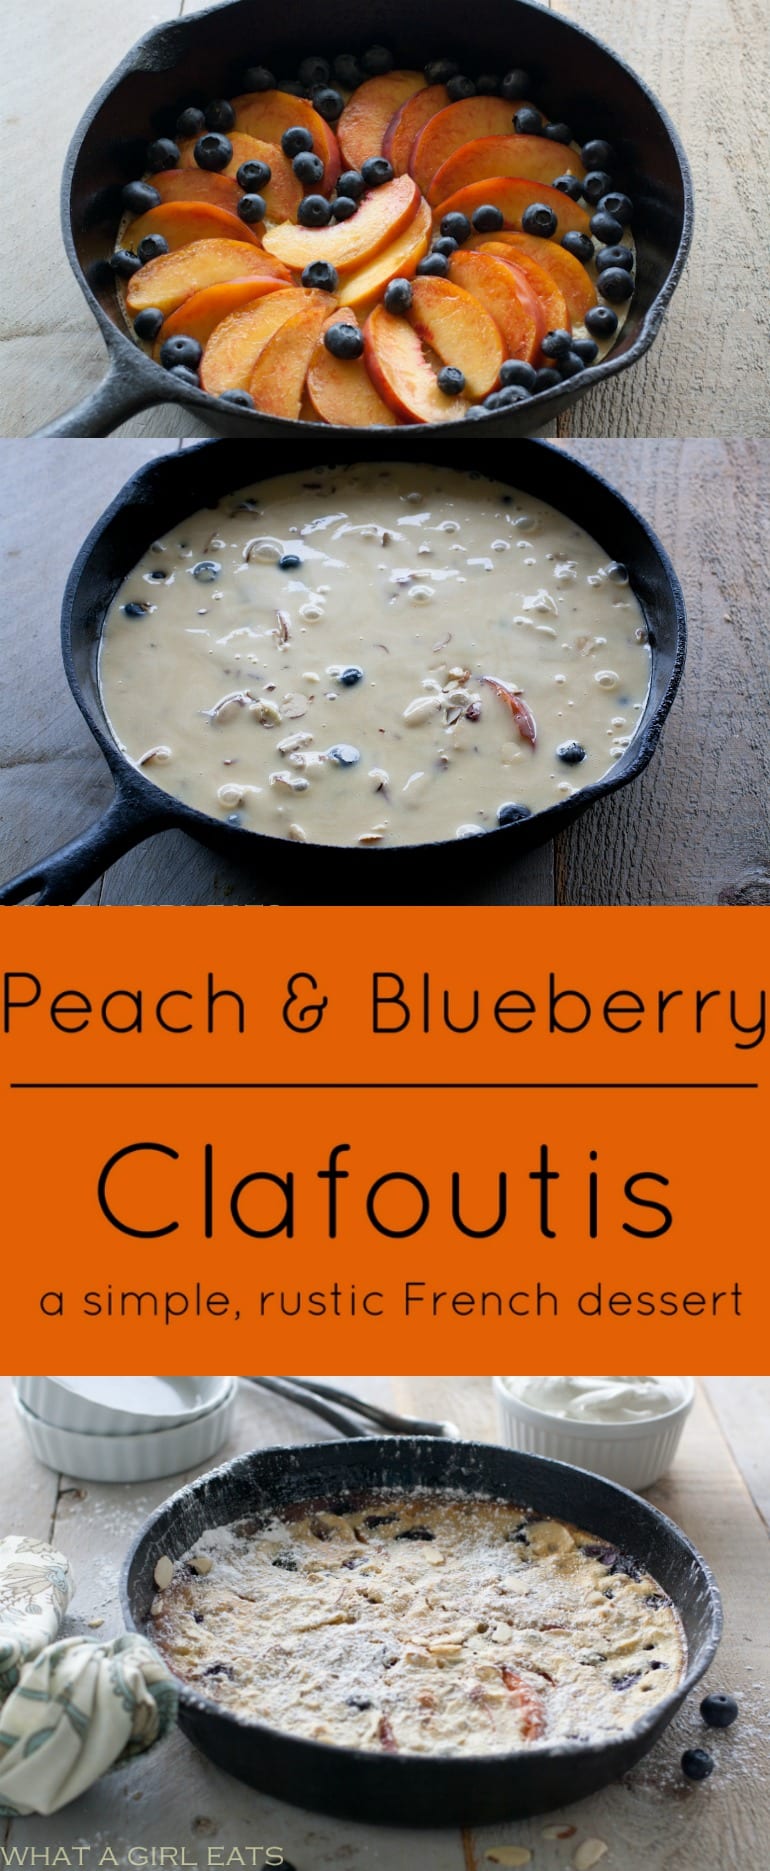 Clafoutis is a rustic French dessert made with fresh fruit that's baked into a custard-like batter. Try this blueberry peach clafoutis